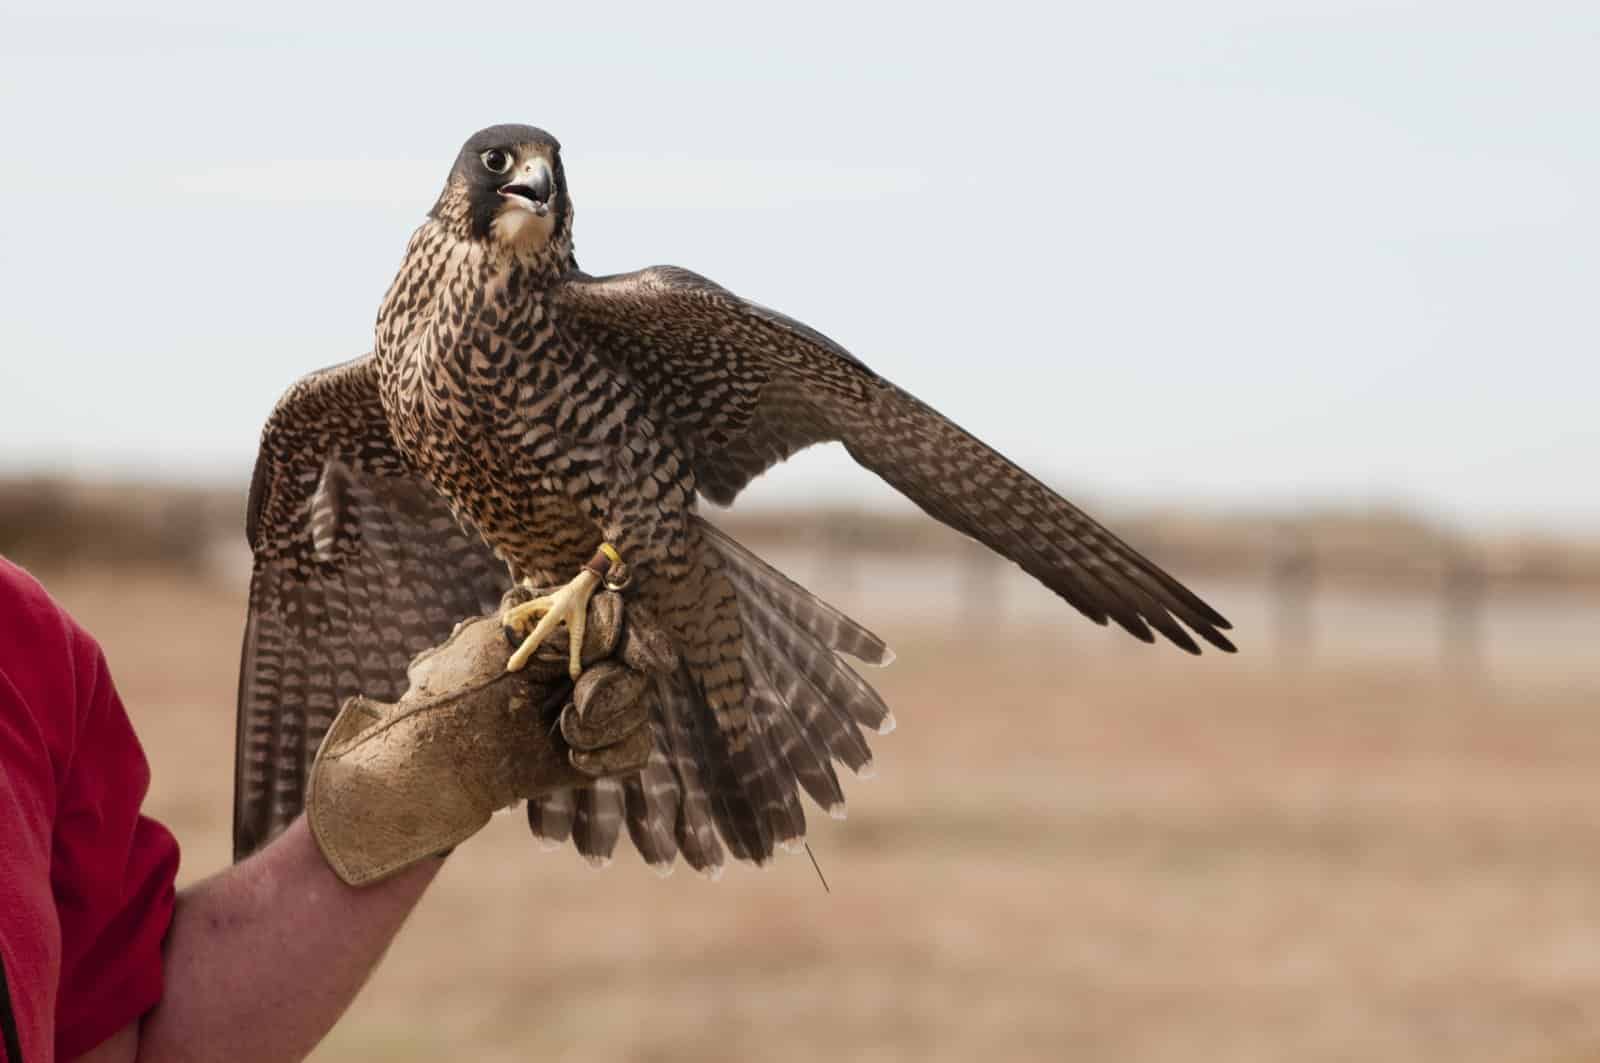 <p class="wp-caption-text">Image Credit: Shutterstock / Robert Crow</p>  <p>Get up close with raptors for an entrance fee that supports conservation. It’s a chance to learn and be awed by nature’s flyers, fitting for families and bird enthusiasts alike.</p>